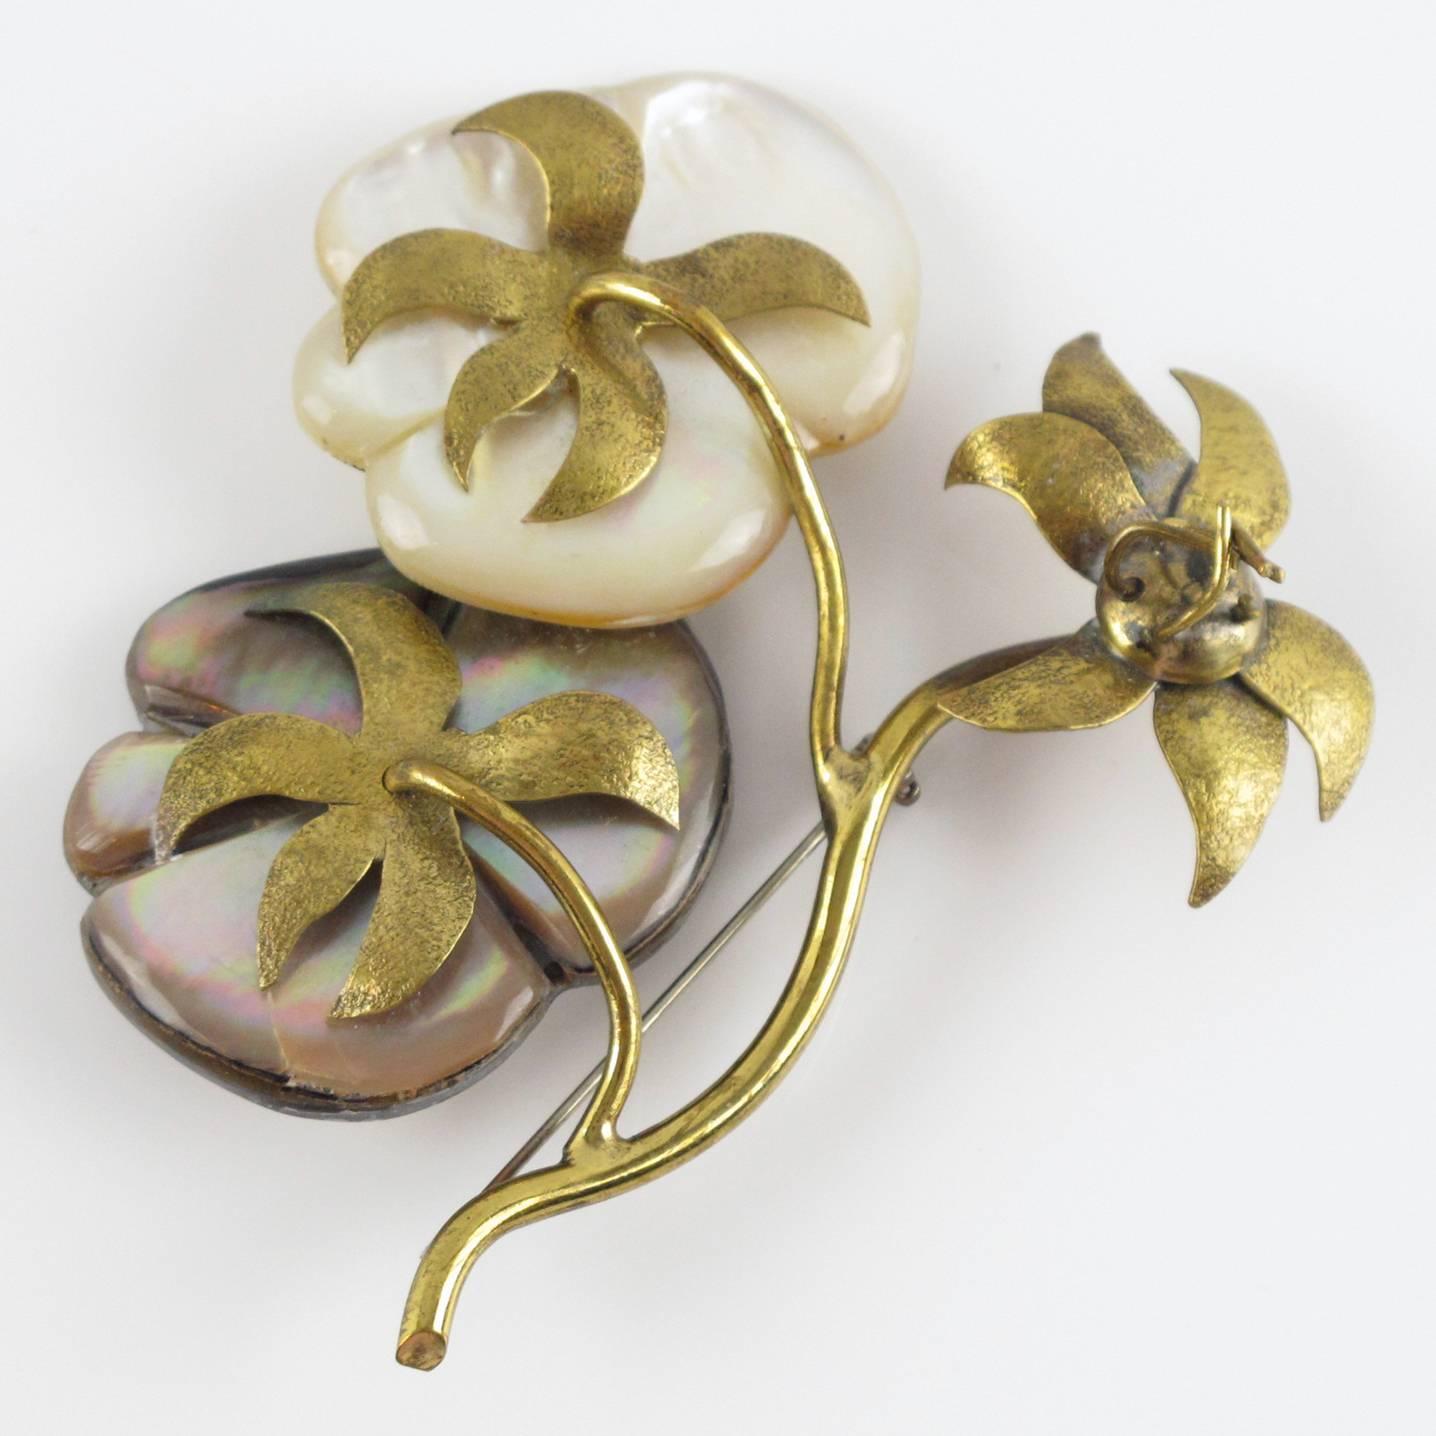 Vintage 1980s floral Brooch Pin by Fabrice, Paris. Large gilt brass flowers design with dimensional hand raised and detailed leaves, compliment with mother of pearl accent. Marked at the back 